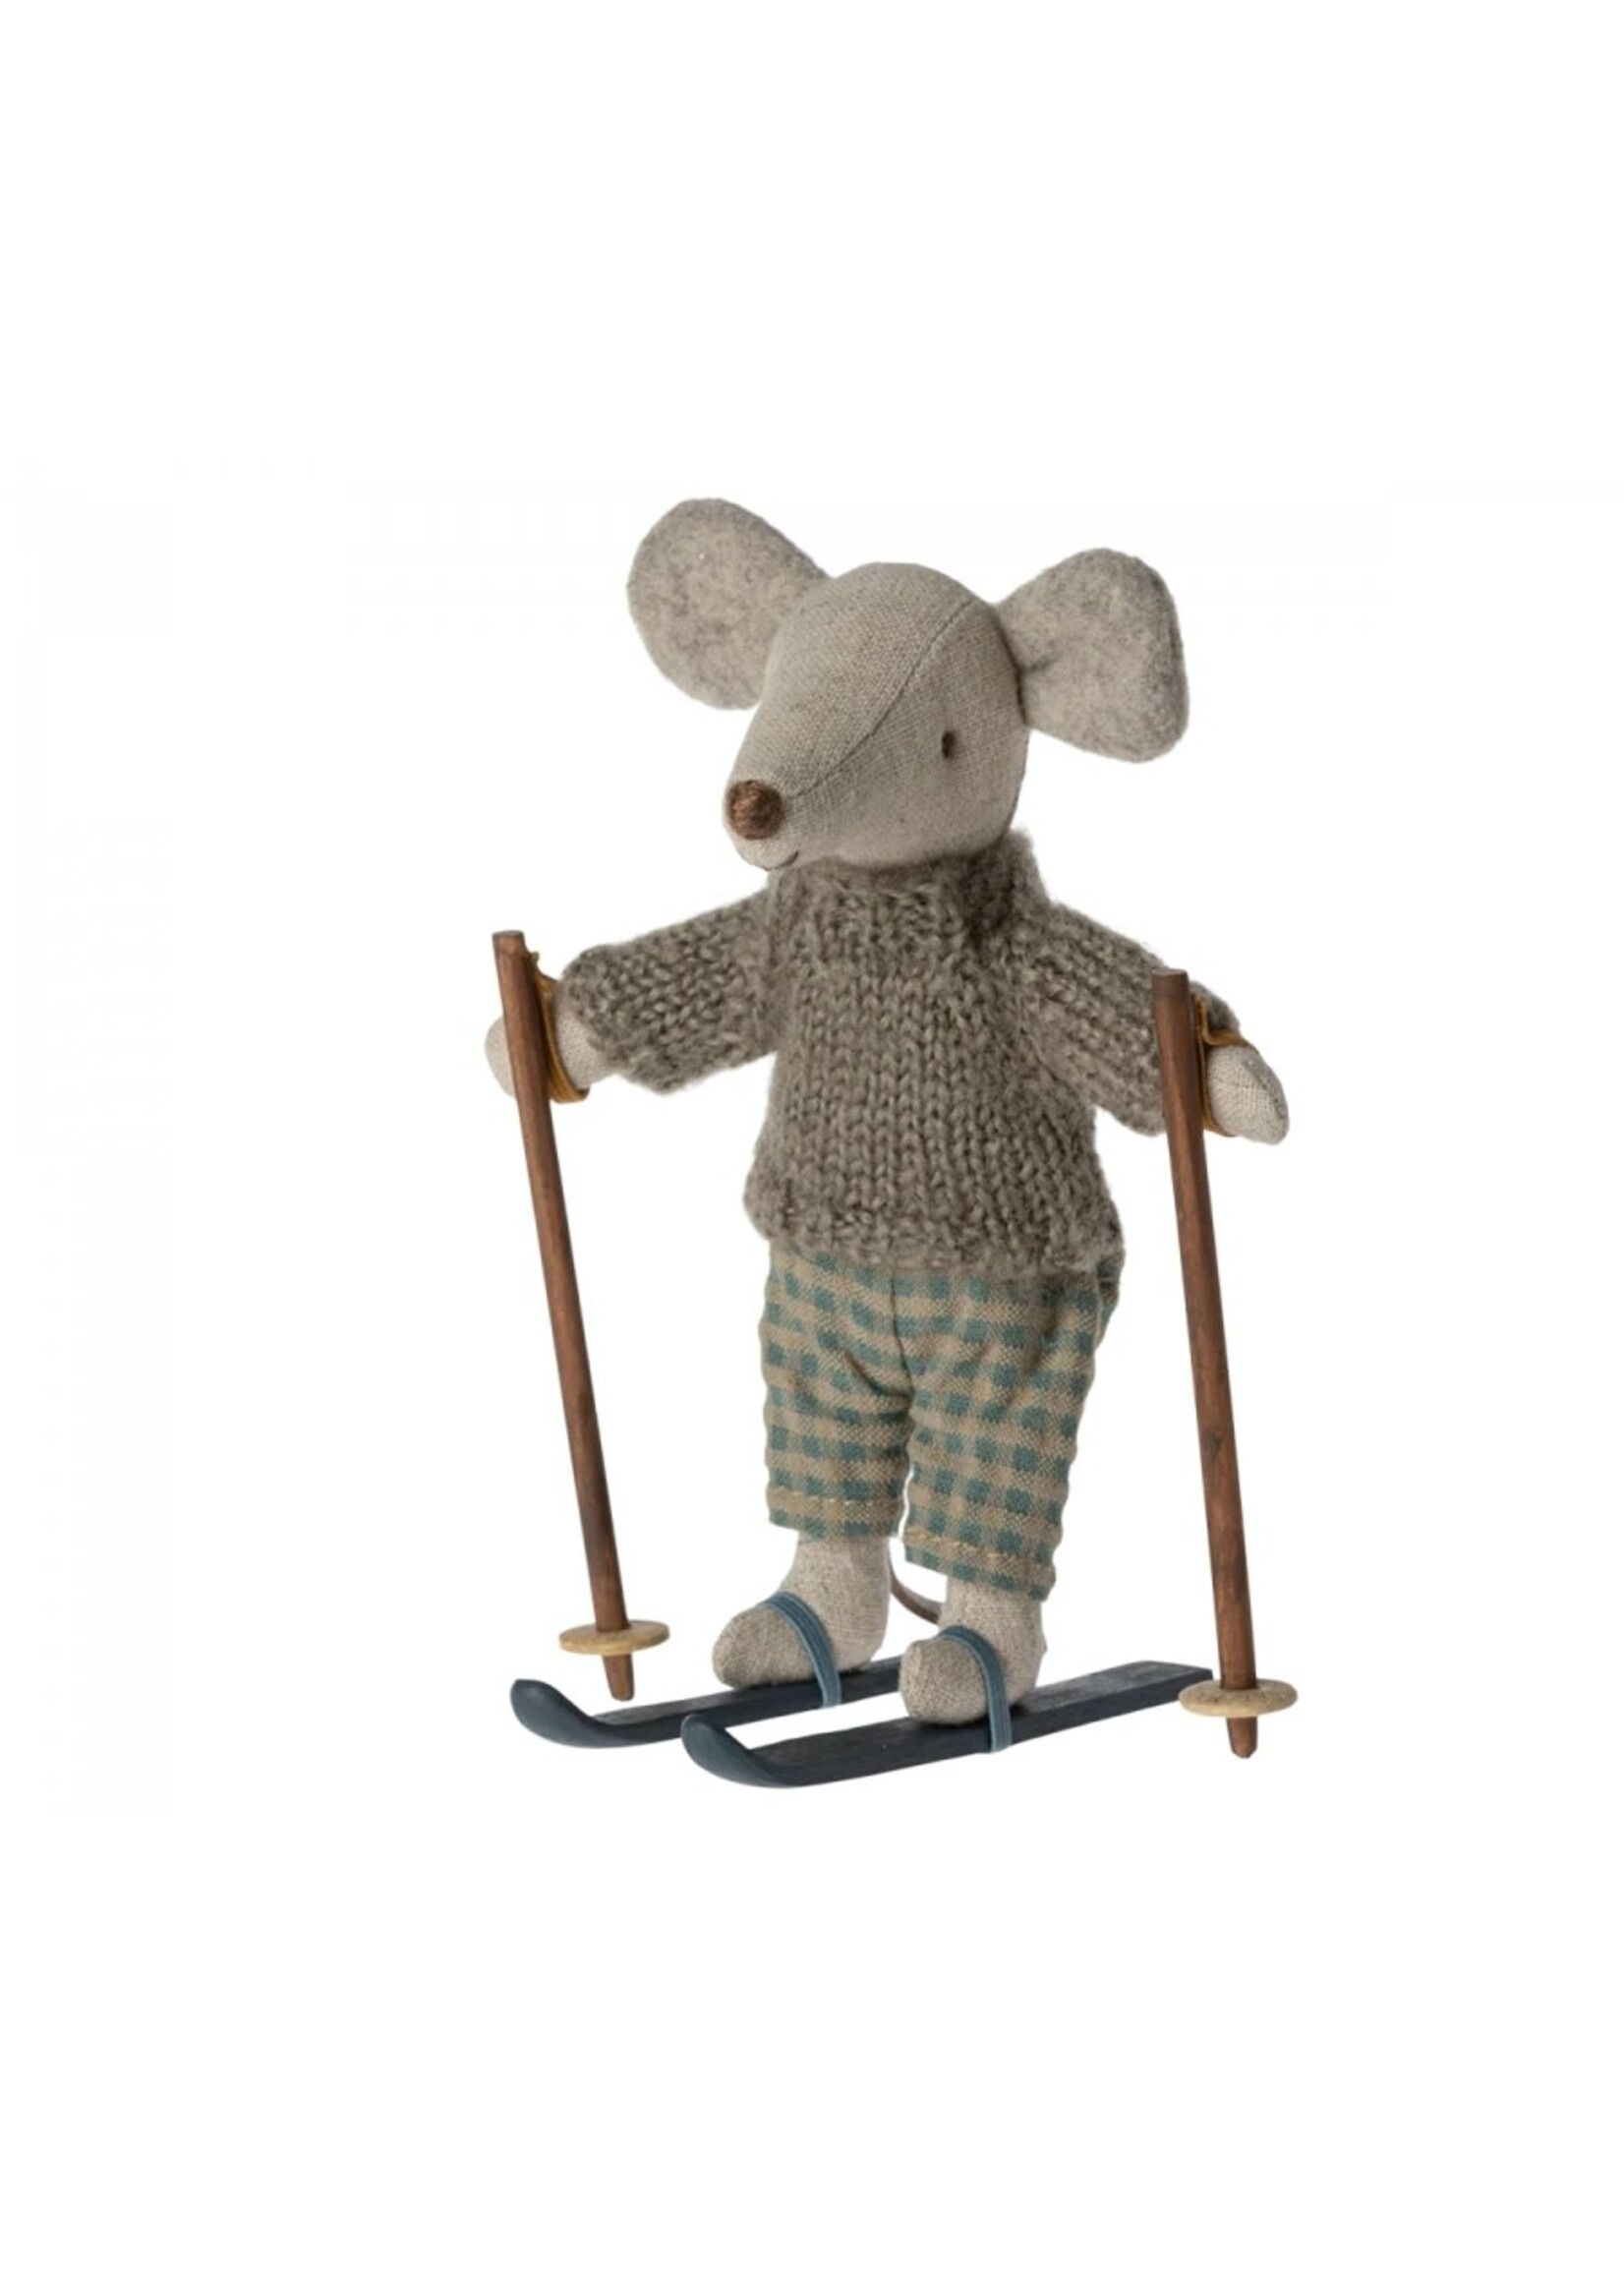 Maileg Big Brother Mouse - Winter with Ski Set